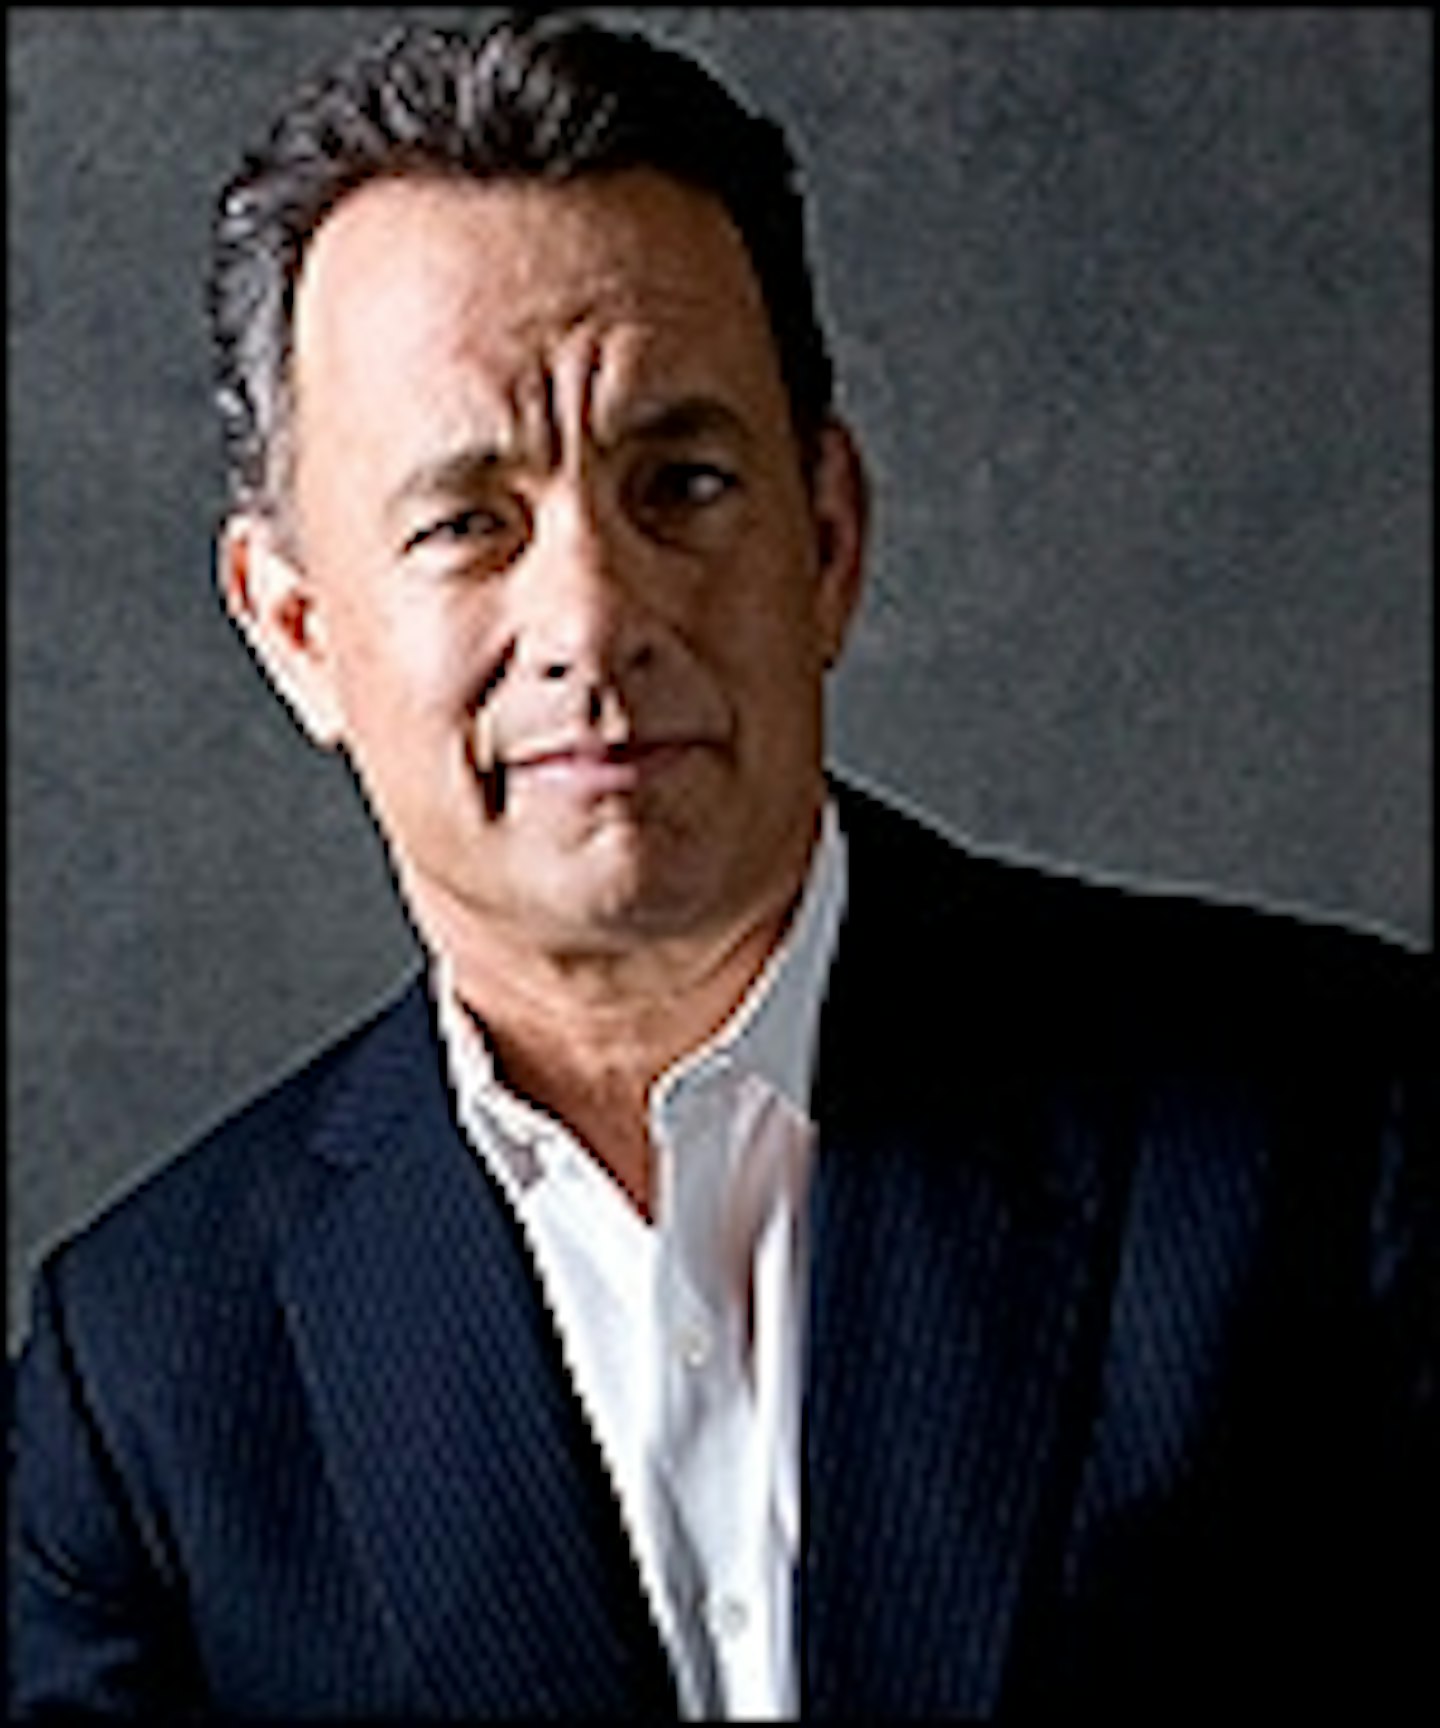 Tom Hanks Getting Extremely Loud